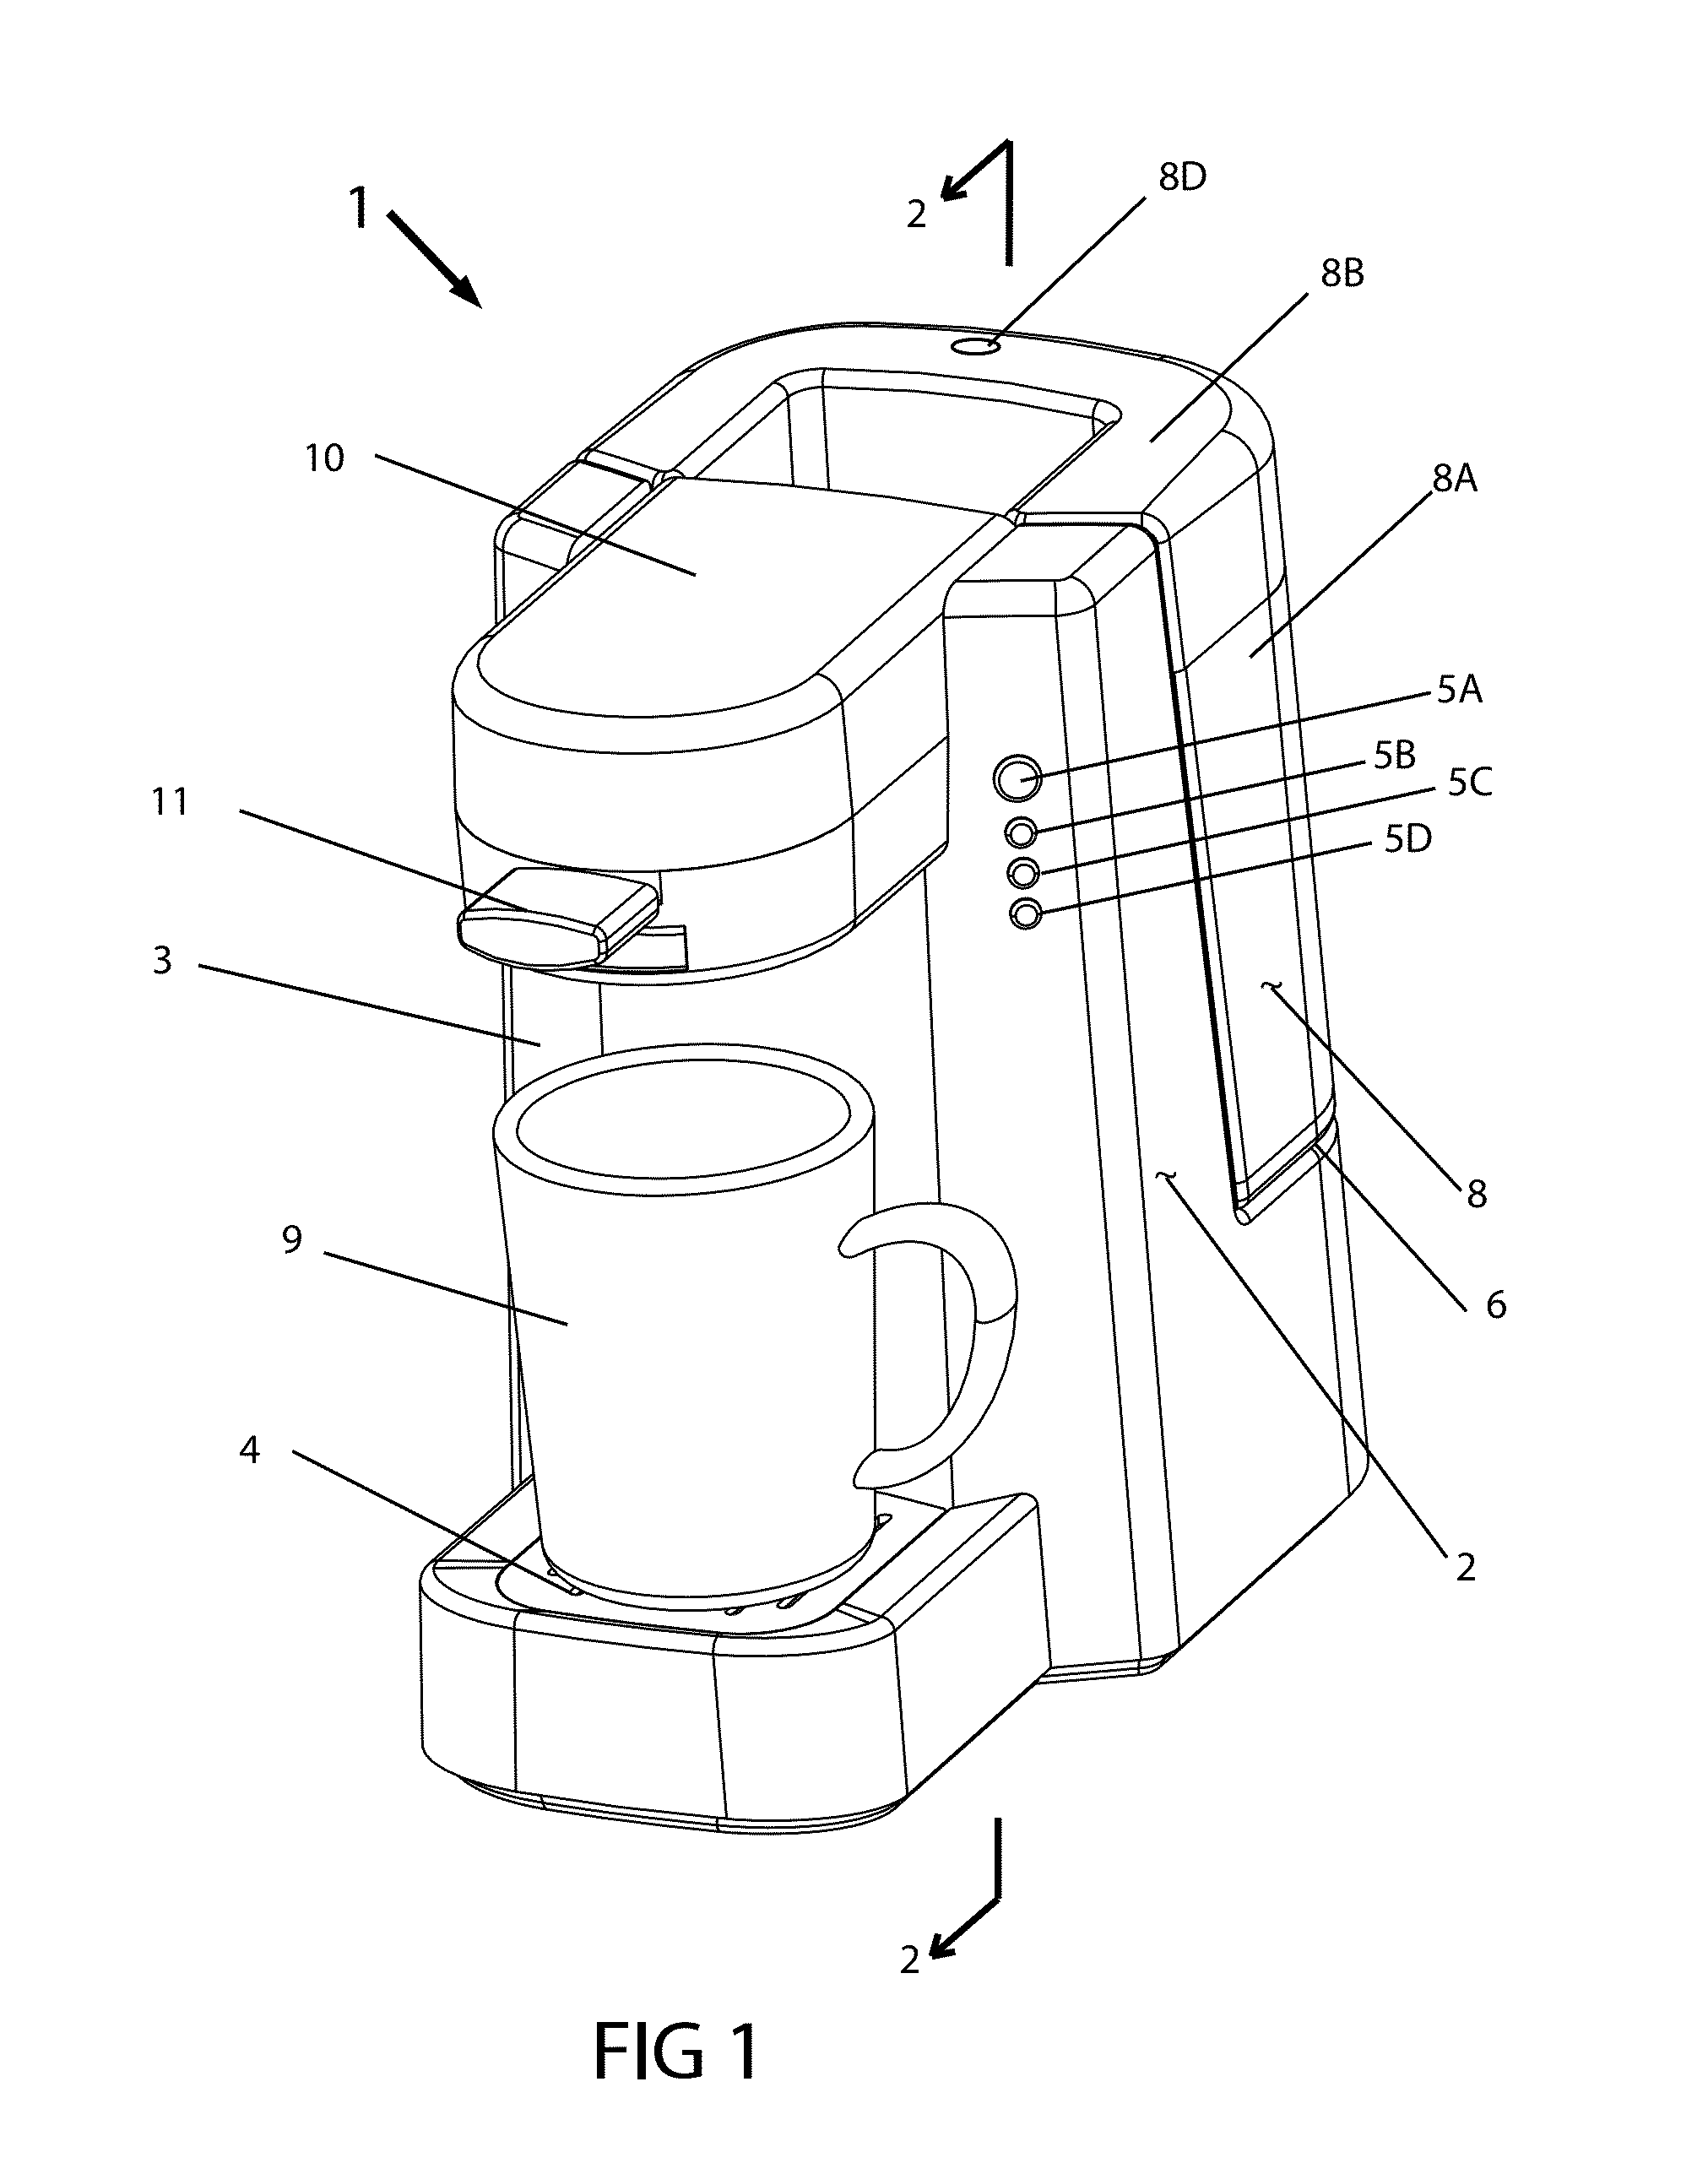 Apparatus and method for infusing hot beverages